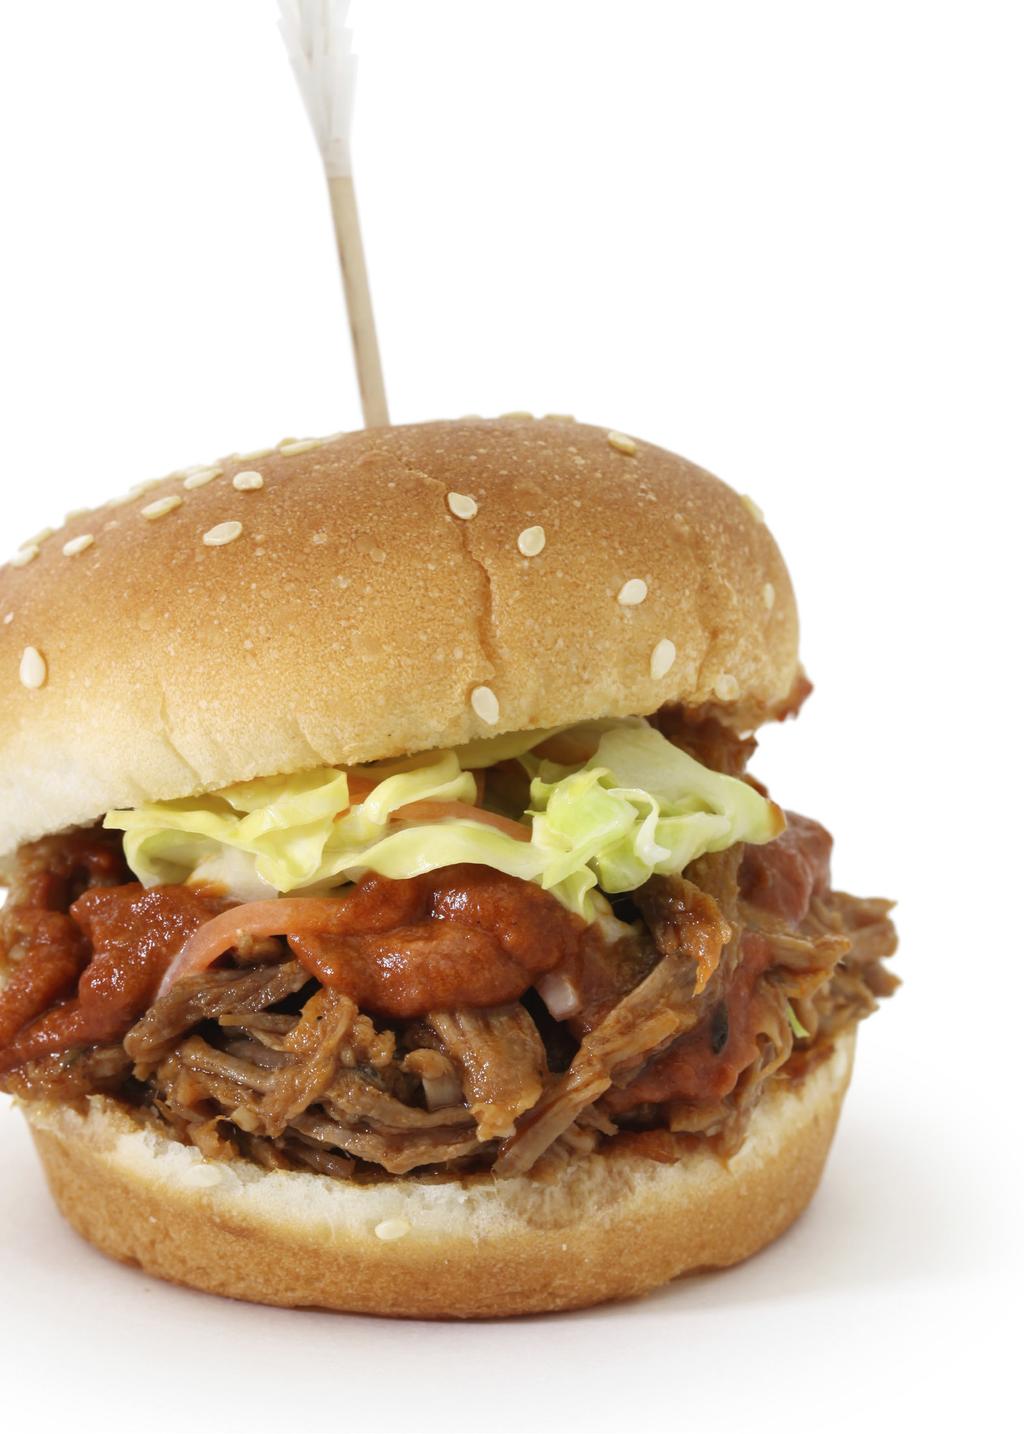 THE HUSKY BARBECUE MINIMUM 50 PEOPLE Choice of: Pulled Pork or Pulled Chicken Traditional Creamy